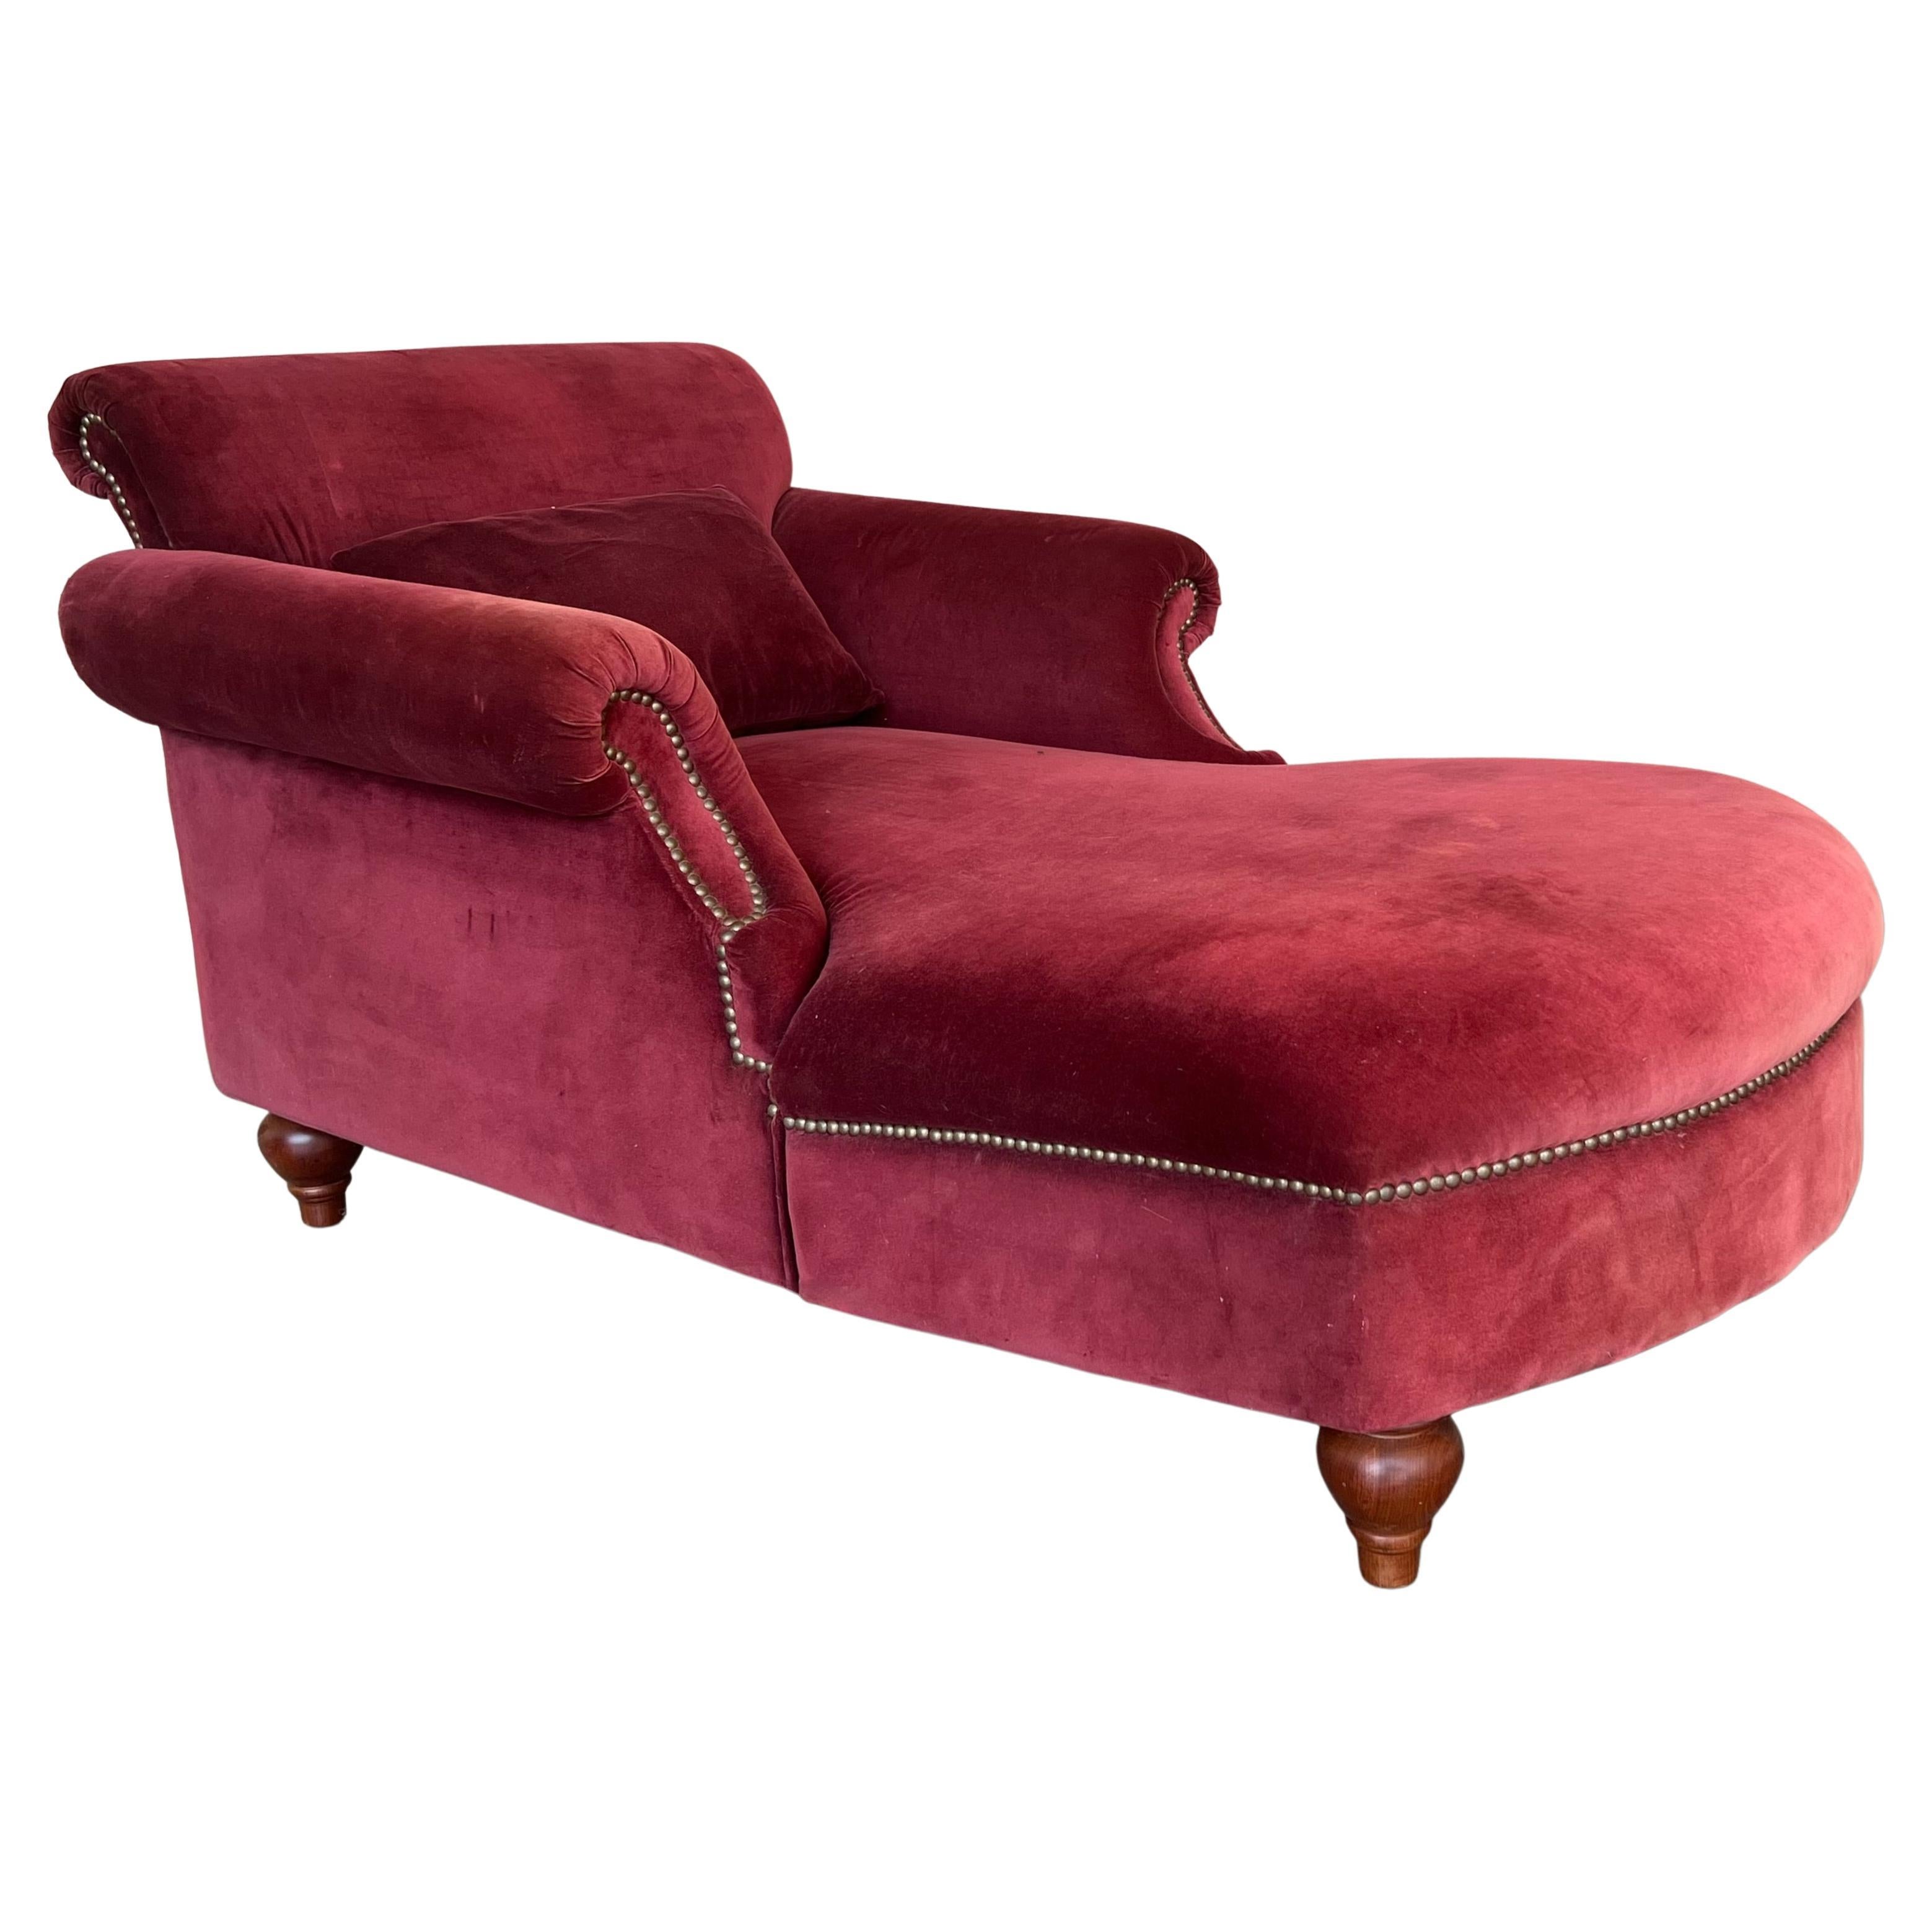 20th Italian Maroon Velvet Chaise Longue with arms